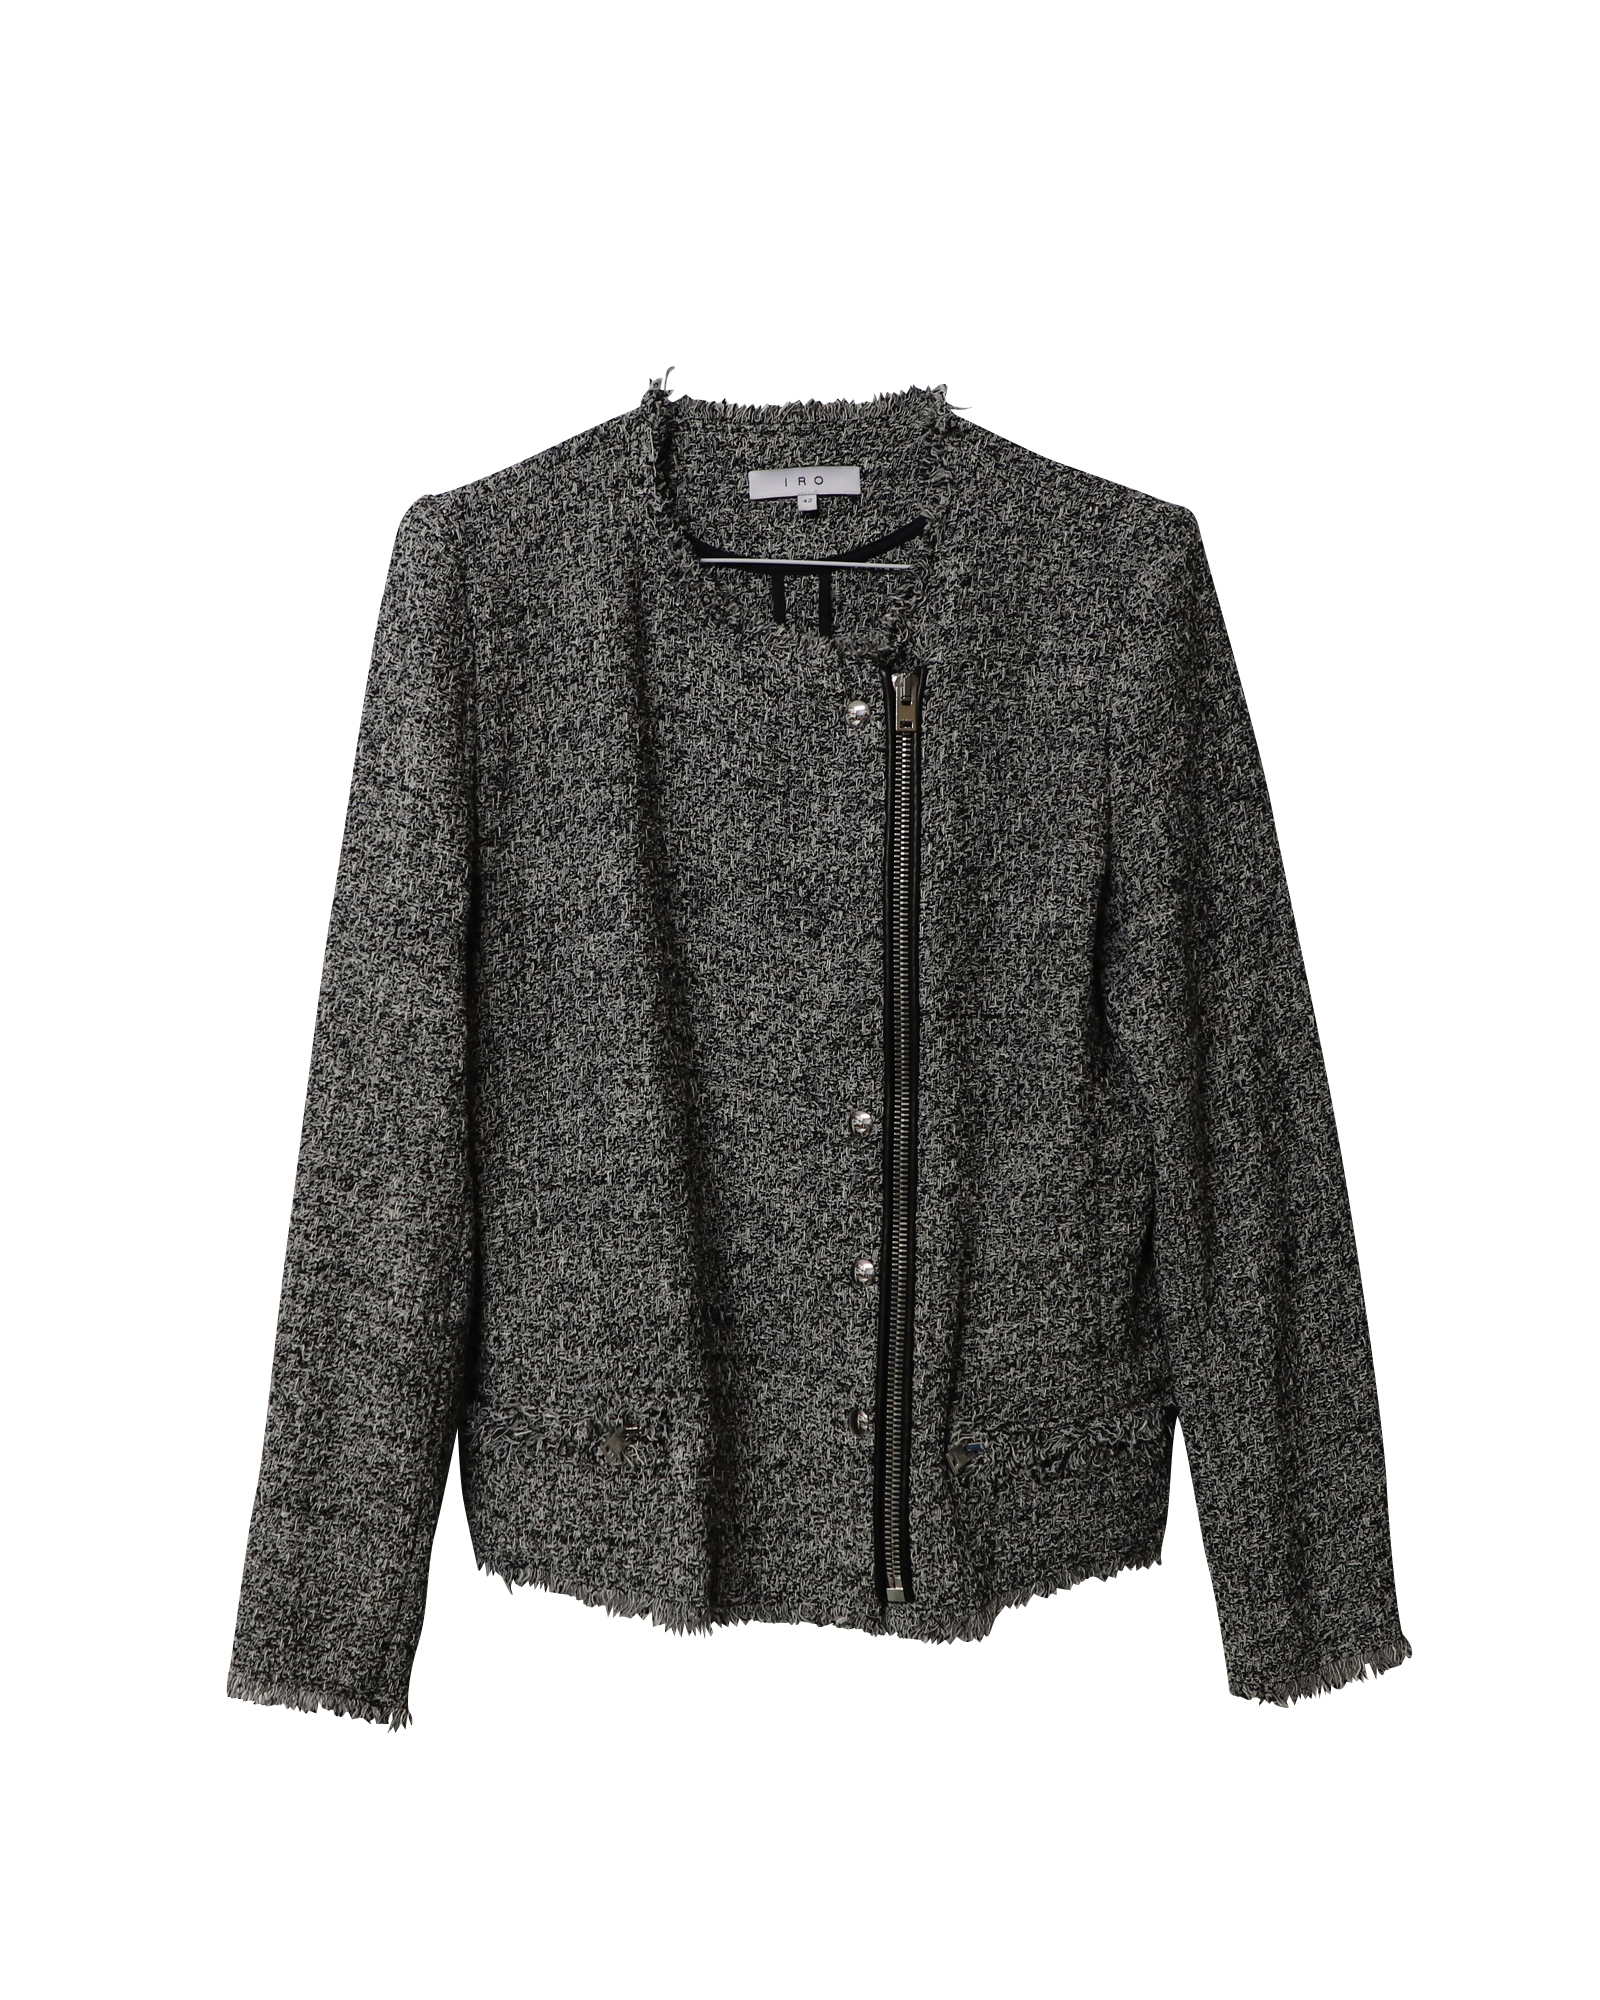 Grey Cotton Tweed Jacket with Crest Dome Buttons